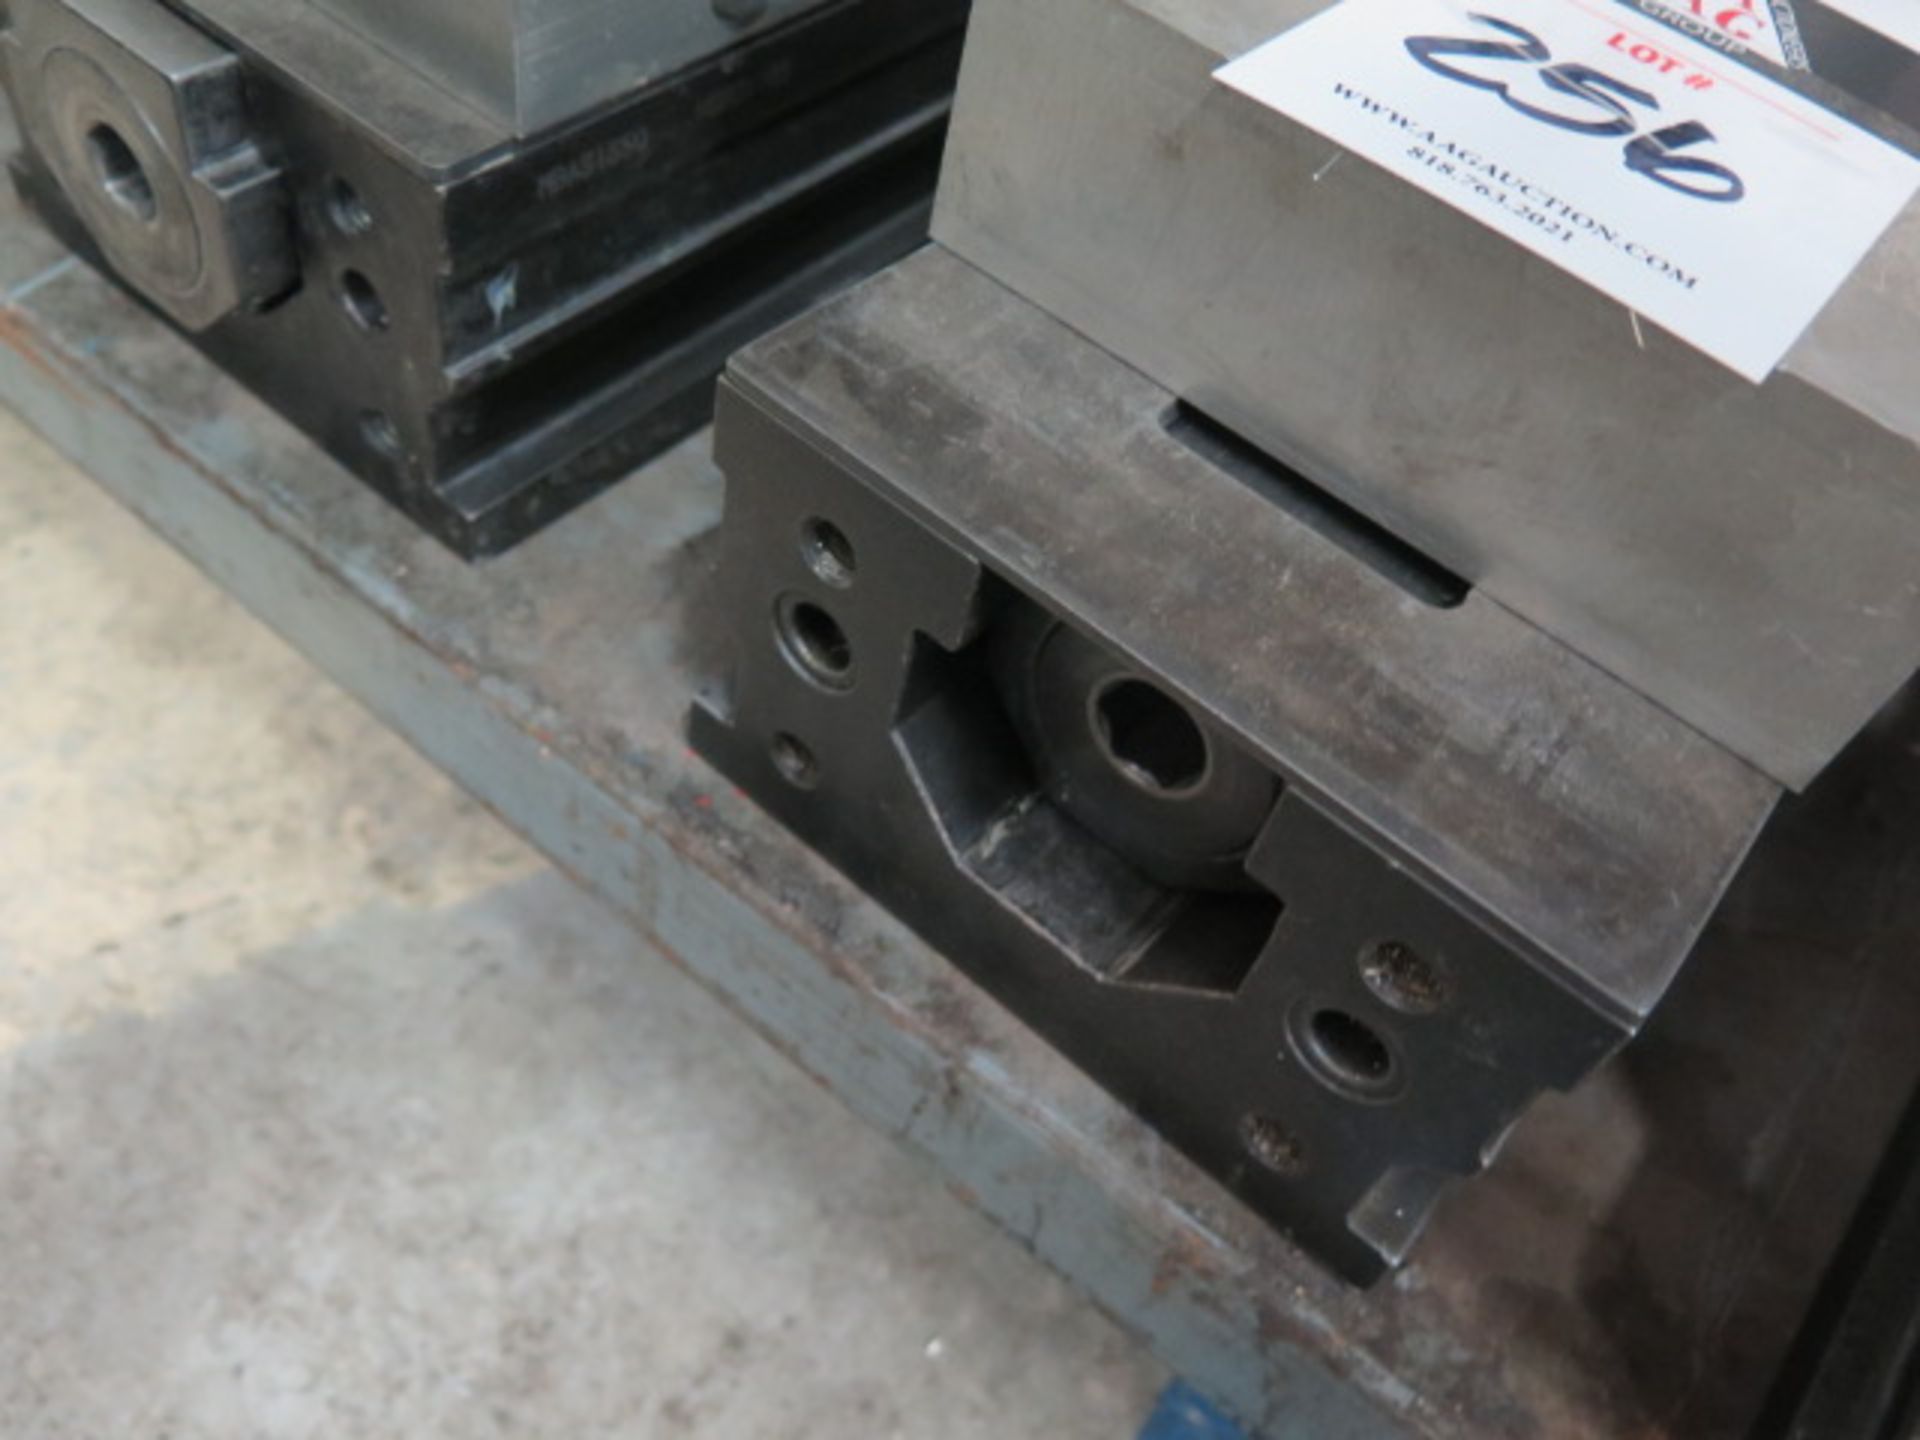 Chick 6” Double-Lock Vise (SOLD AS-IS - NO WARRANTY) - Image 2 of 3